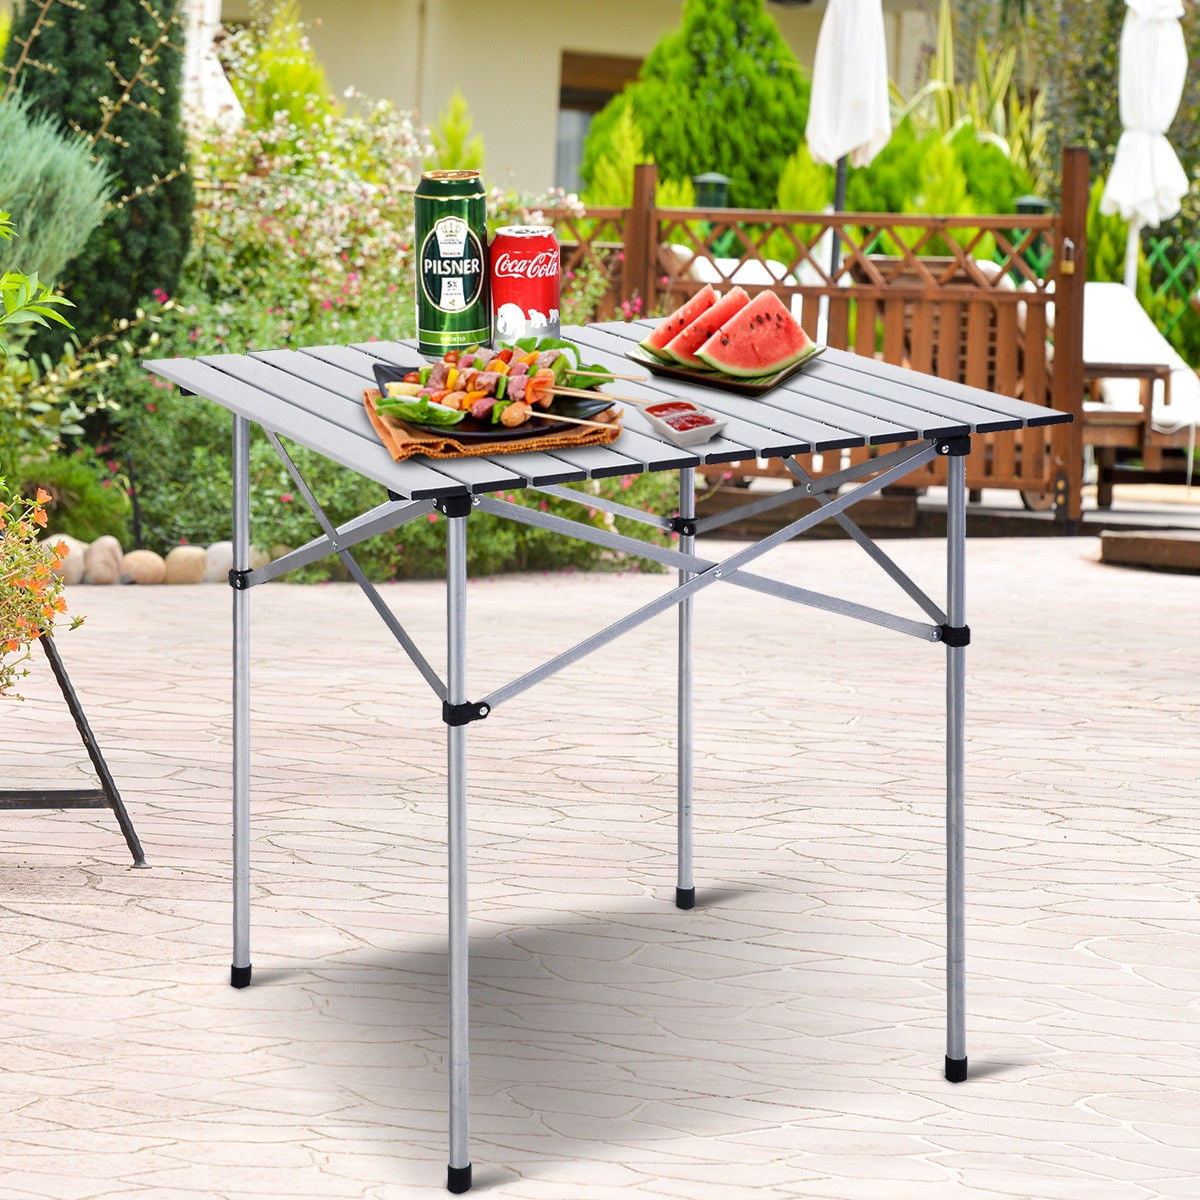 Roll-Up Portable Folding Table Camping Desk Indoor Outdoor BBQ Picnic Table 